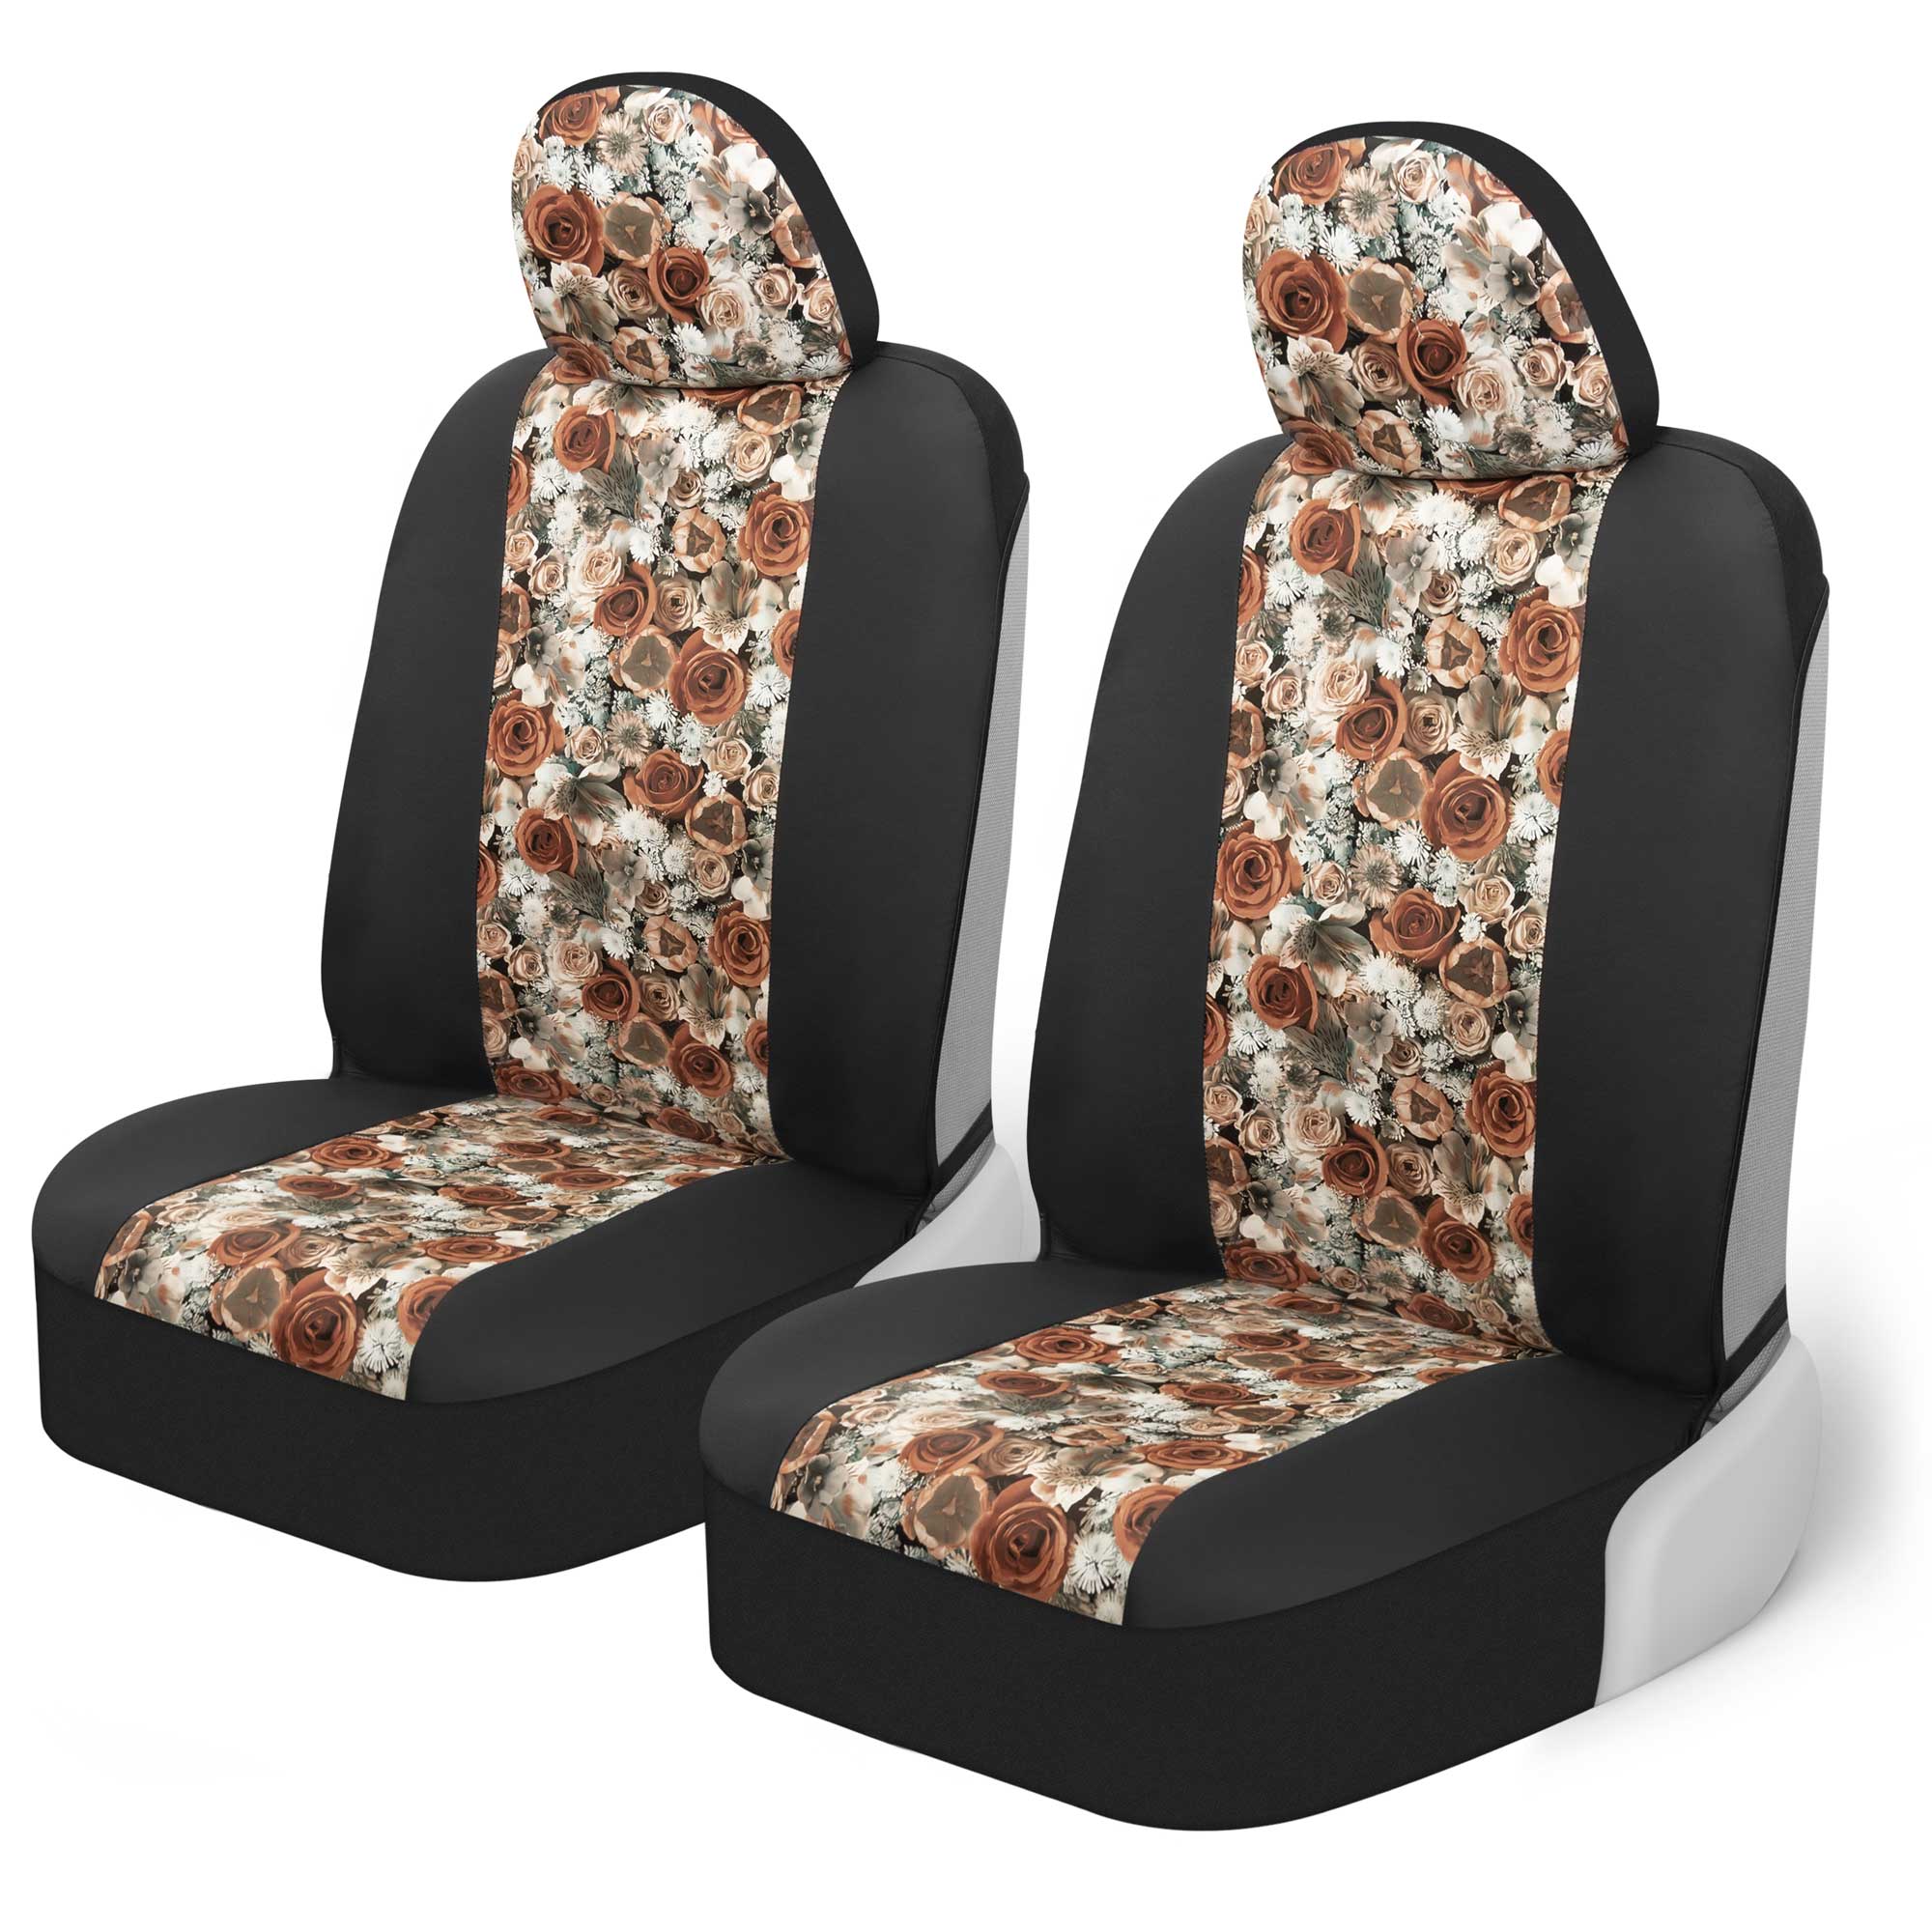 BDK Dusty Rose Floral Faux Leather Car Seat Covers for Front Seats, 2 Pack – Flower Pattern Front Seat Cover Set, Sideless Design for Easy Installation, Fits Most Car Truck Van and SUV